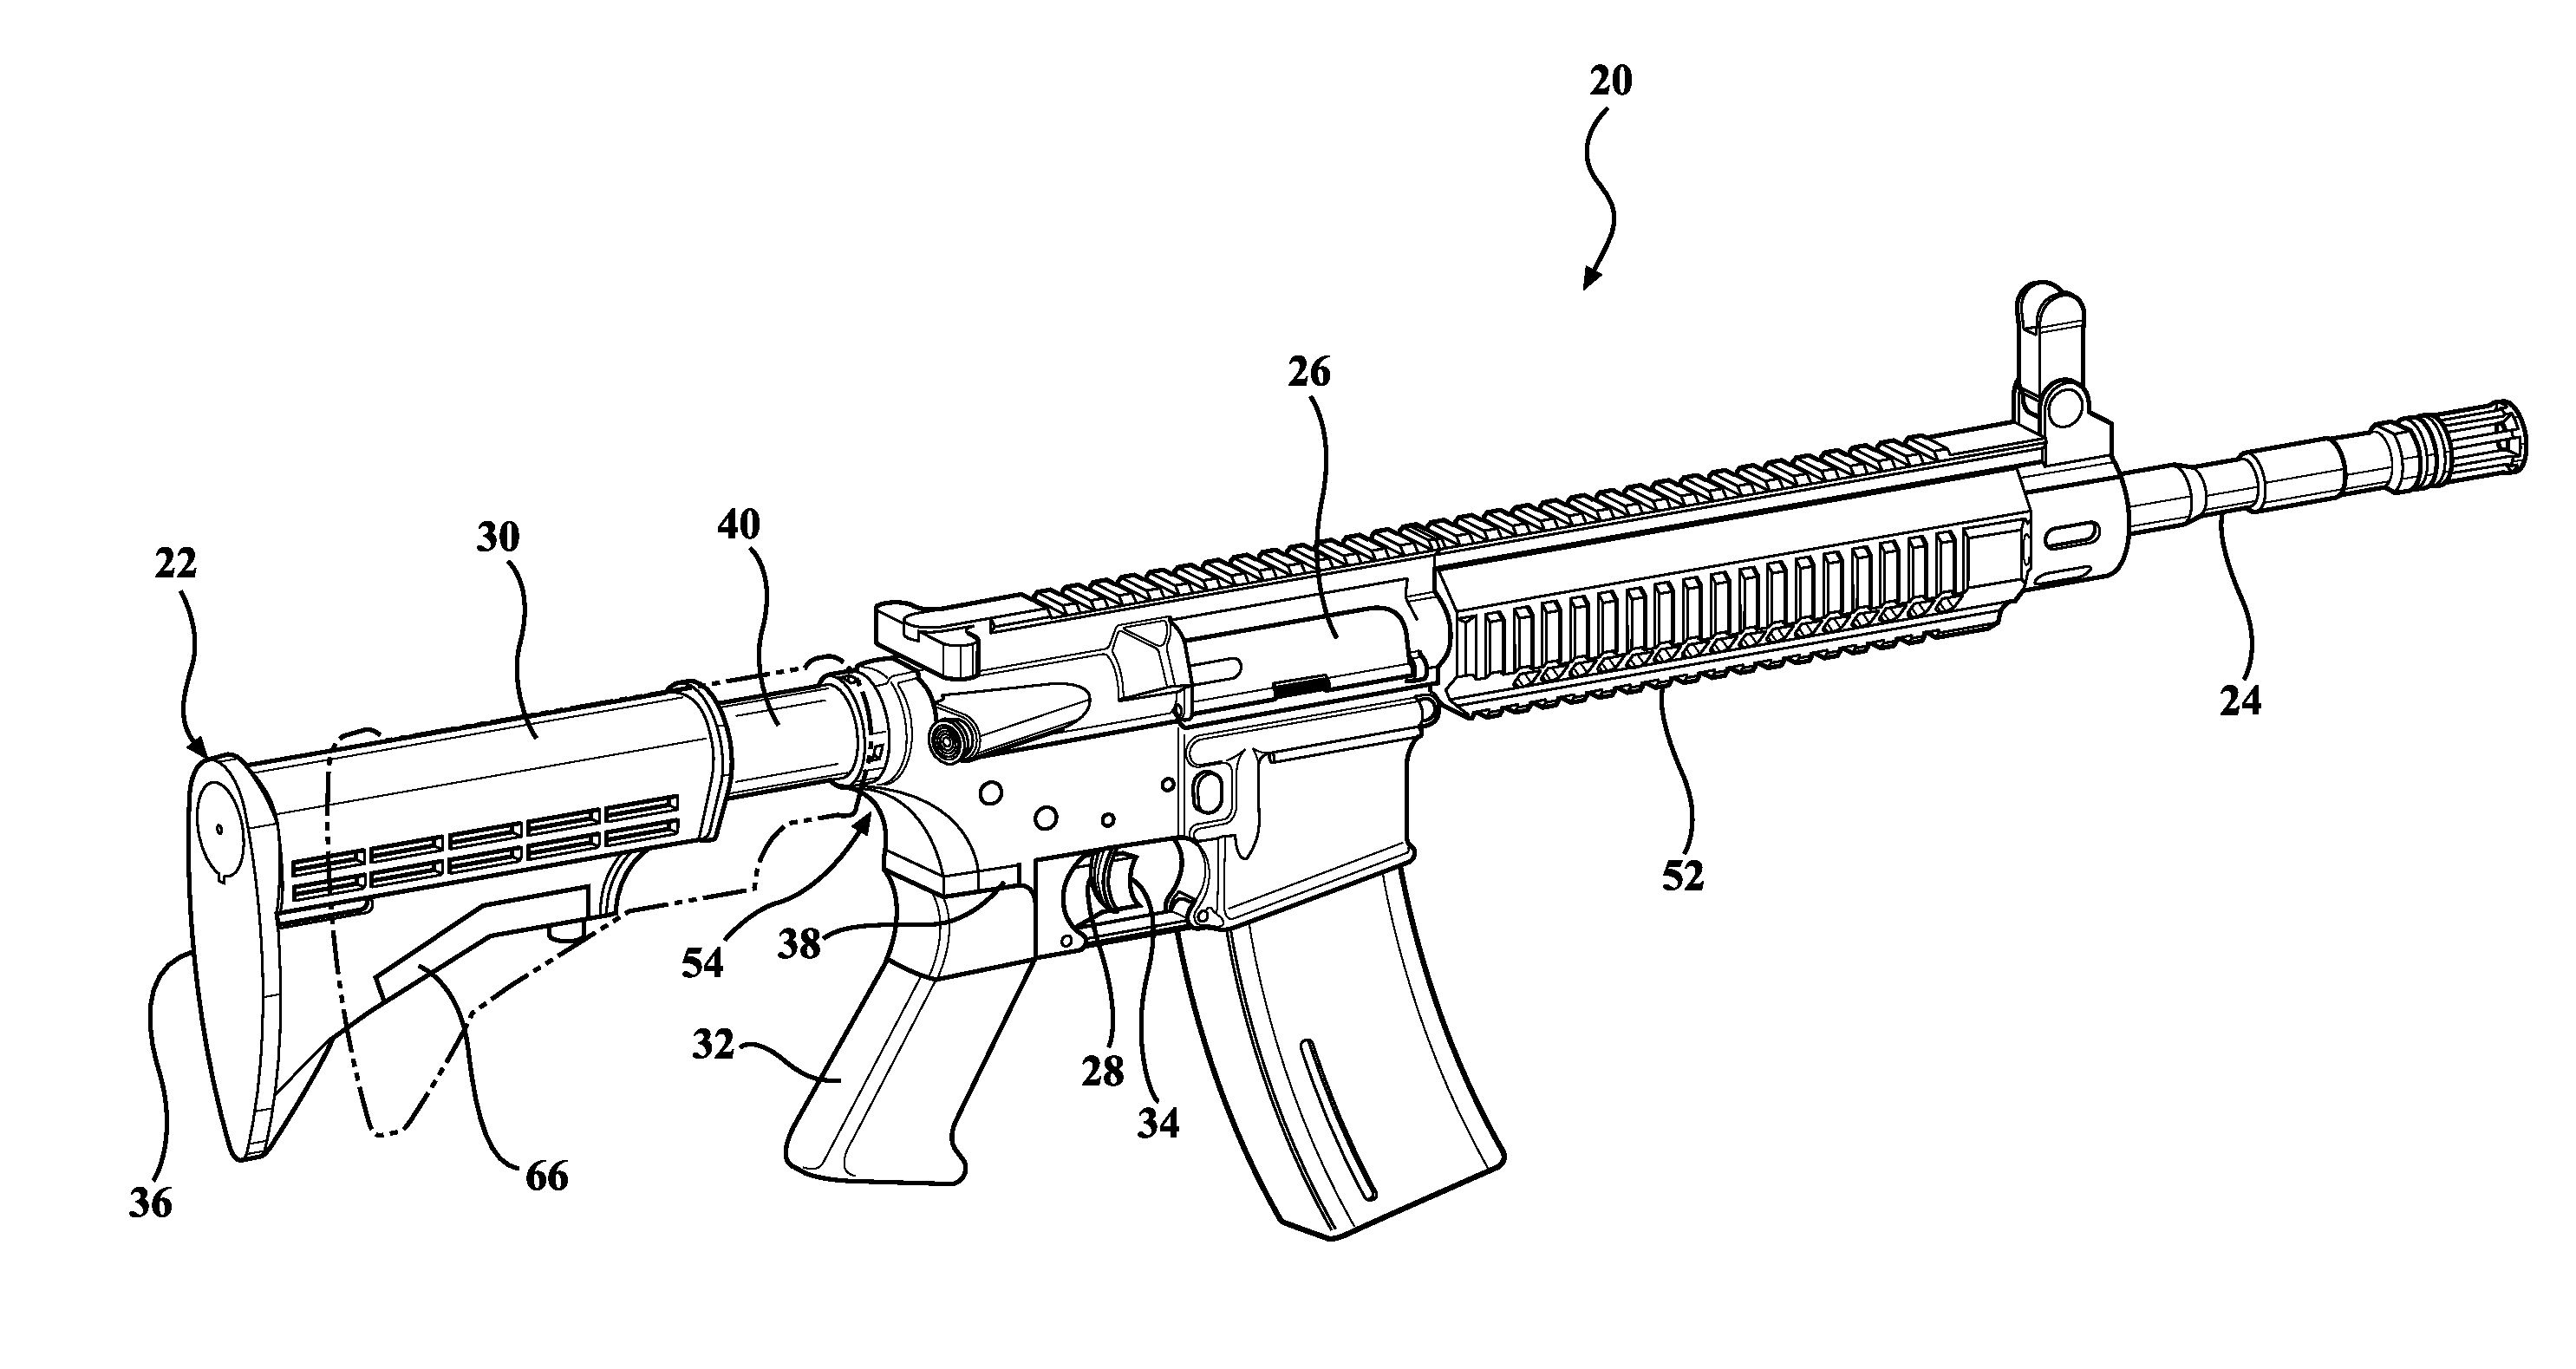 Adjustable slide-action stock for firearms